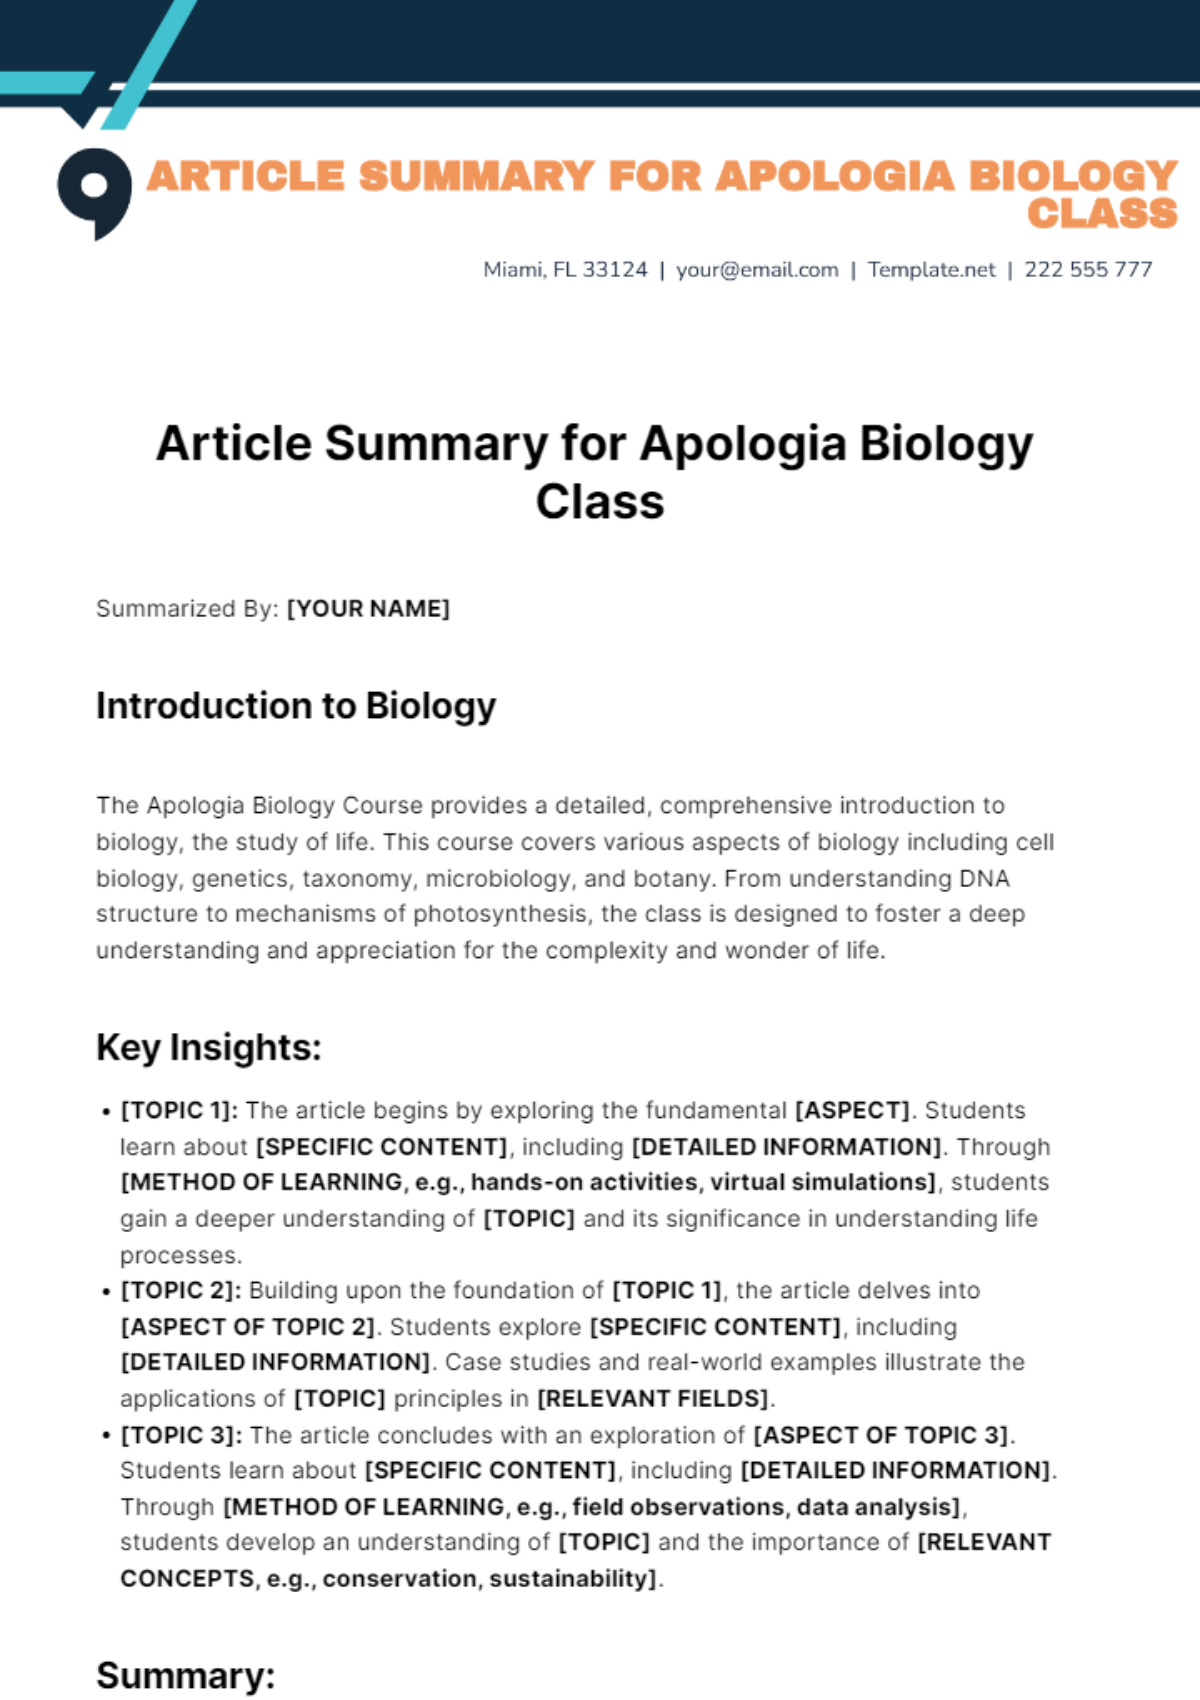 Free Article Summary for Apologia Biology Class Template